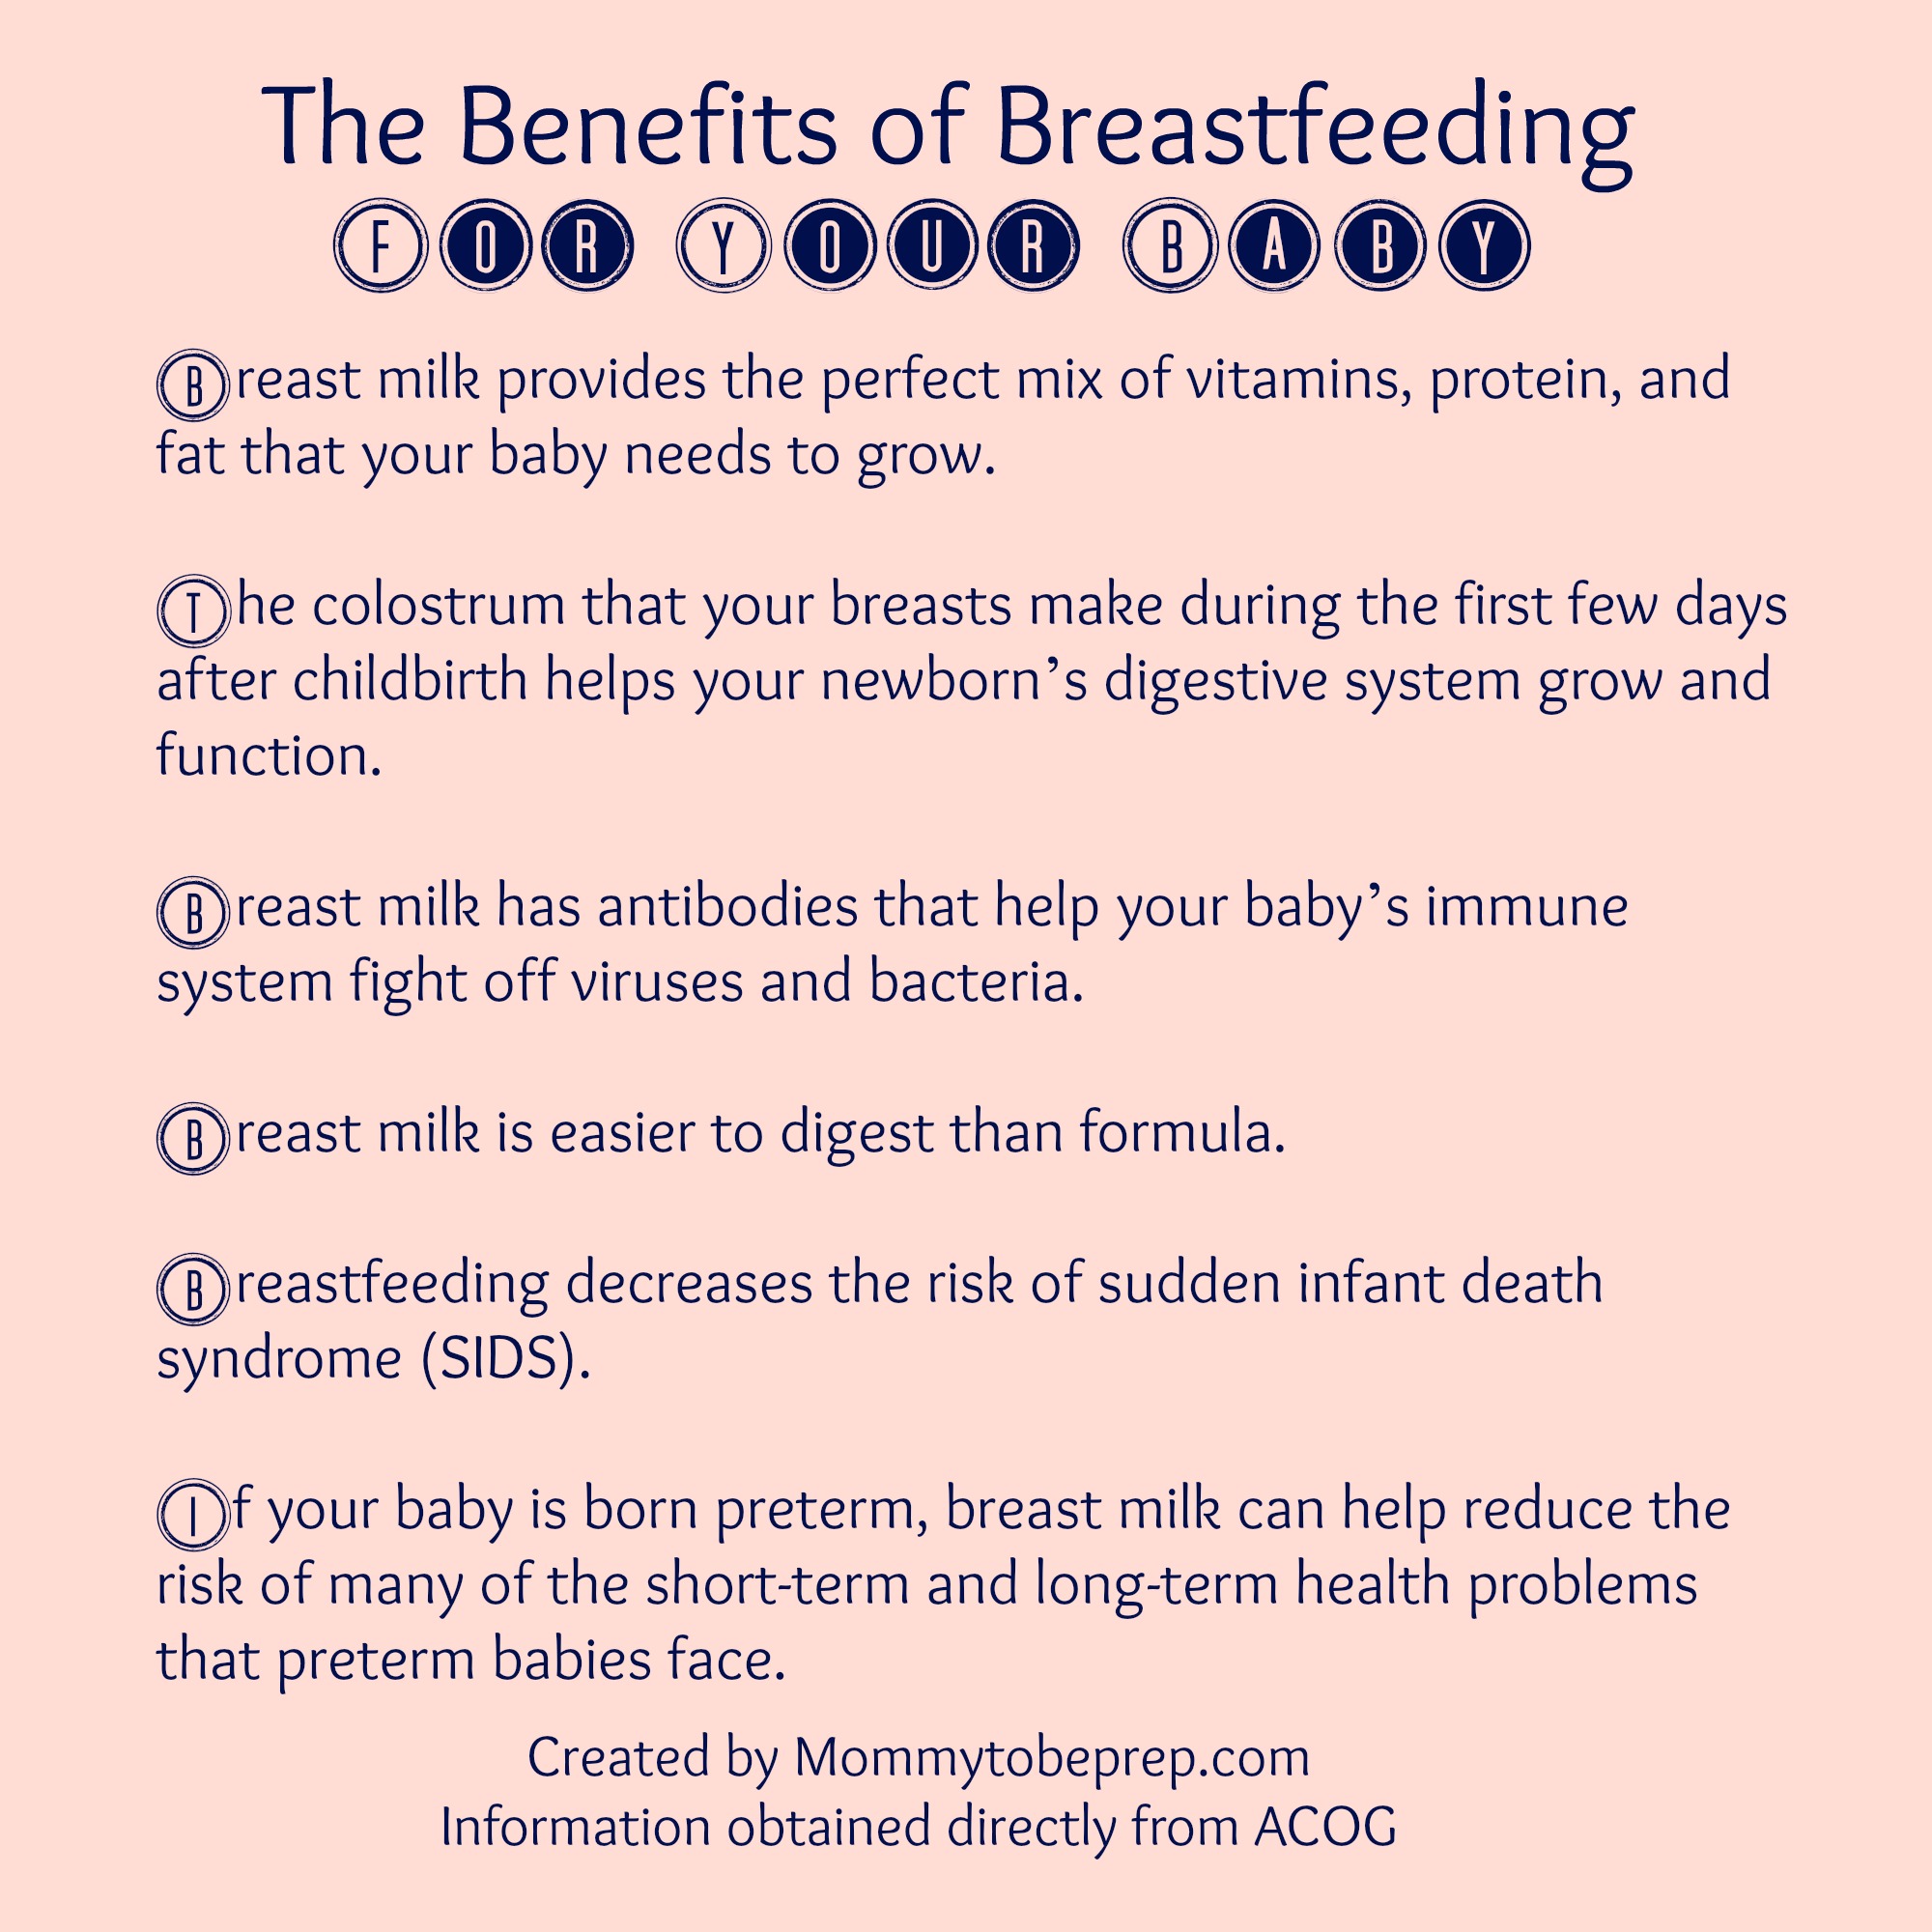 Benefits of combination feeding - Let's talk Birth and Baby